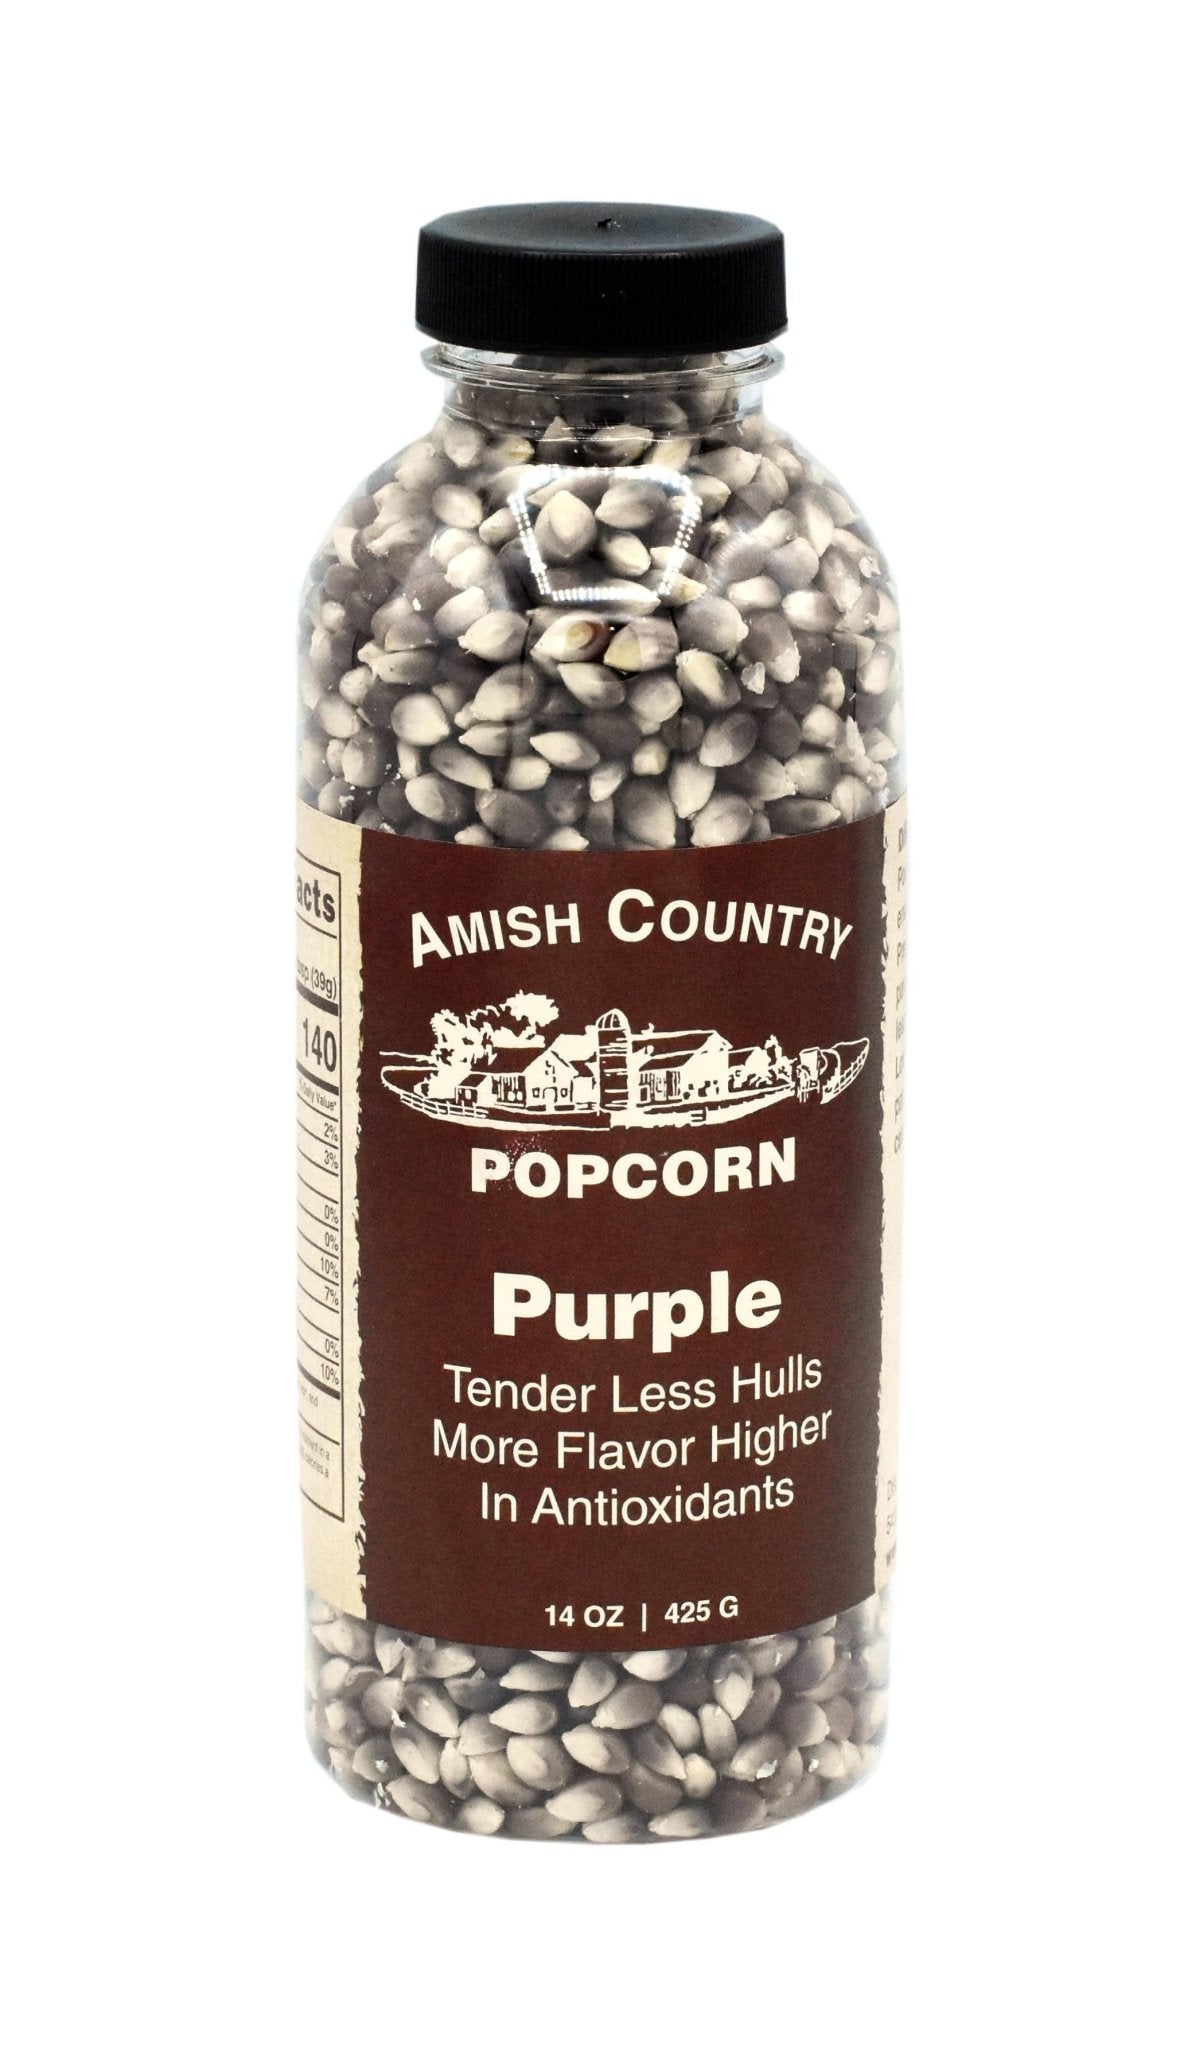 Amish Country Popcorn - 14oz Bottle of Purple Popcorn - Pacific Flyway Supplies